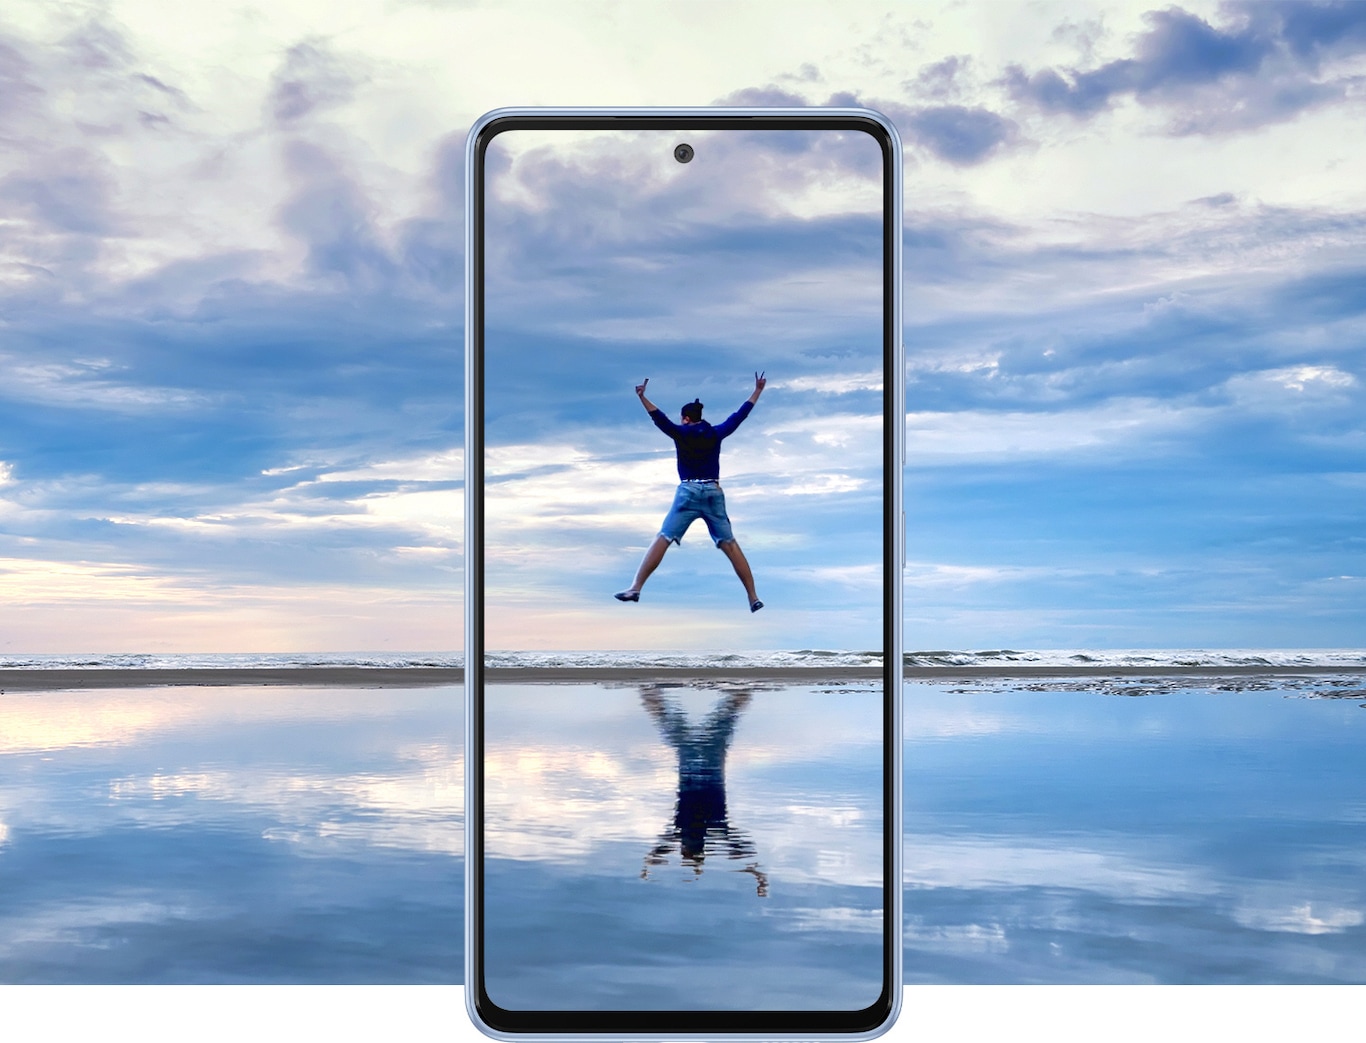 Check Samsung Galaxy A53 release dates & specs, read a review from real customers and compare Samsung A53 with other models. The smartphone with an OIS camera and a 5,000mAh battery. Samsung Galaxy A53 5G seen from the front against a beautiful landscape